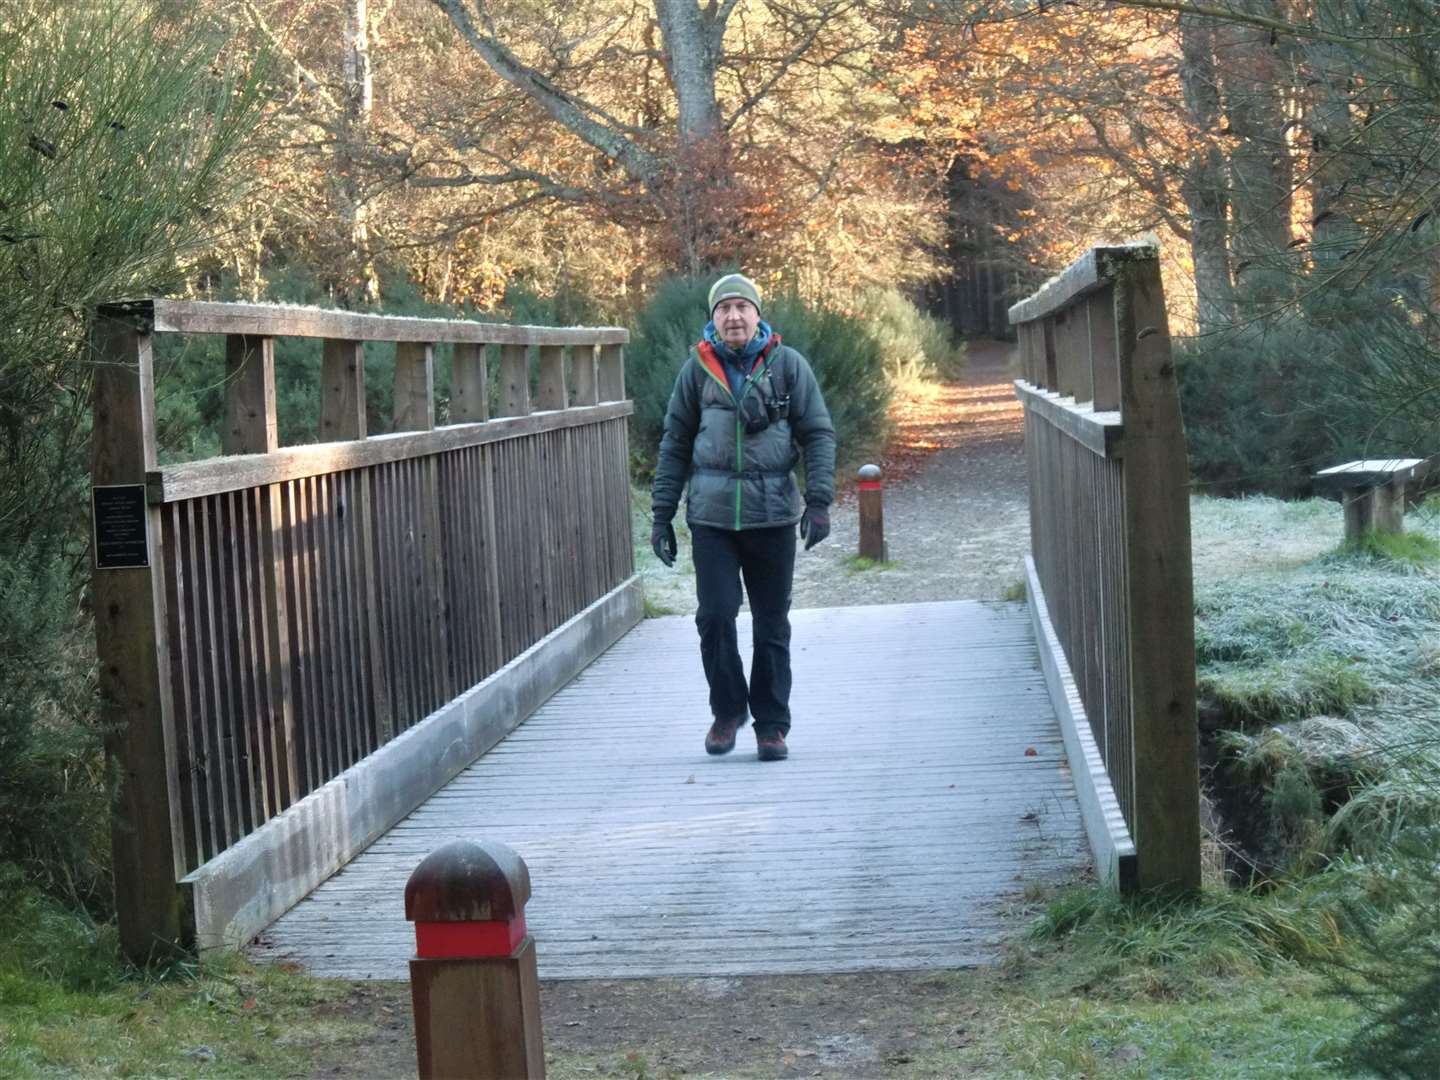 Peter crosses the bridge over the burn shortly after entering Balblair Wood.